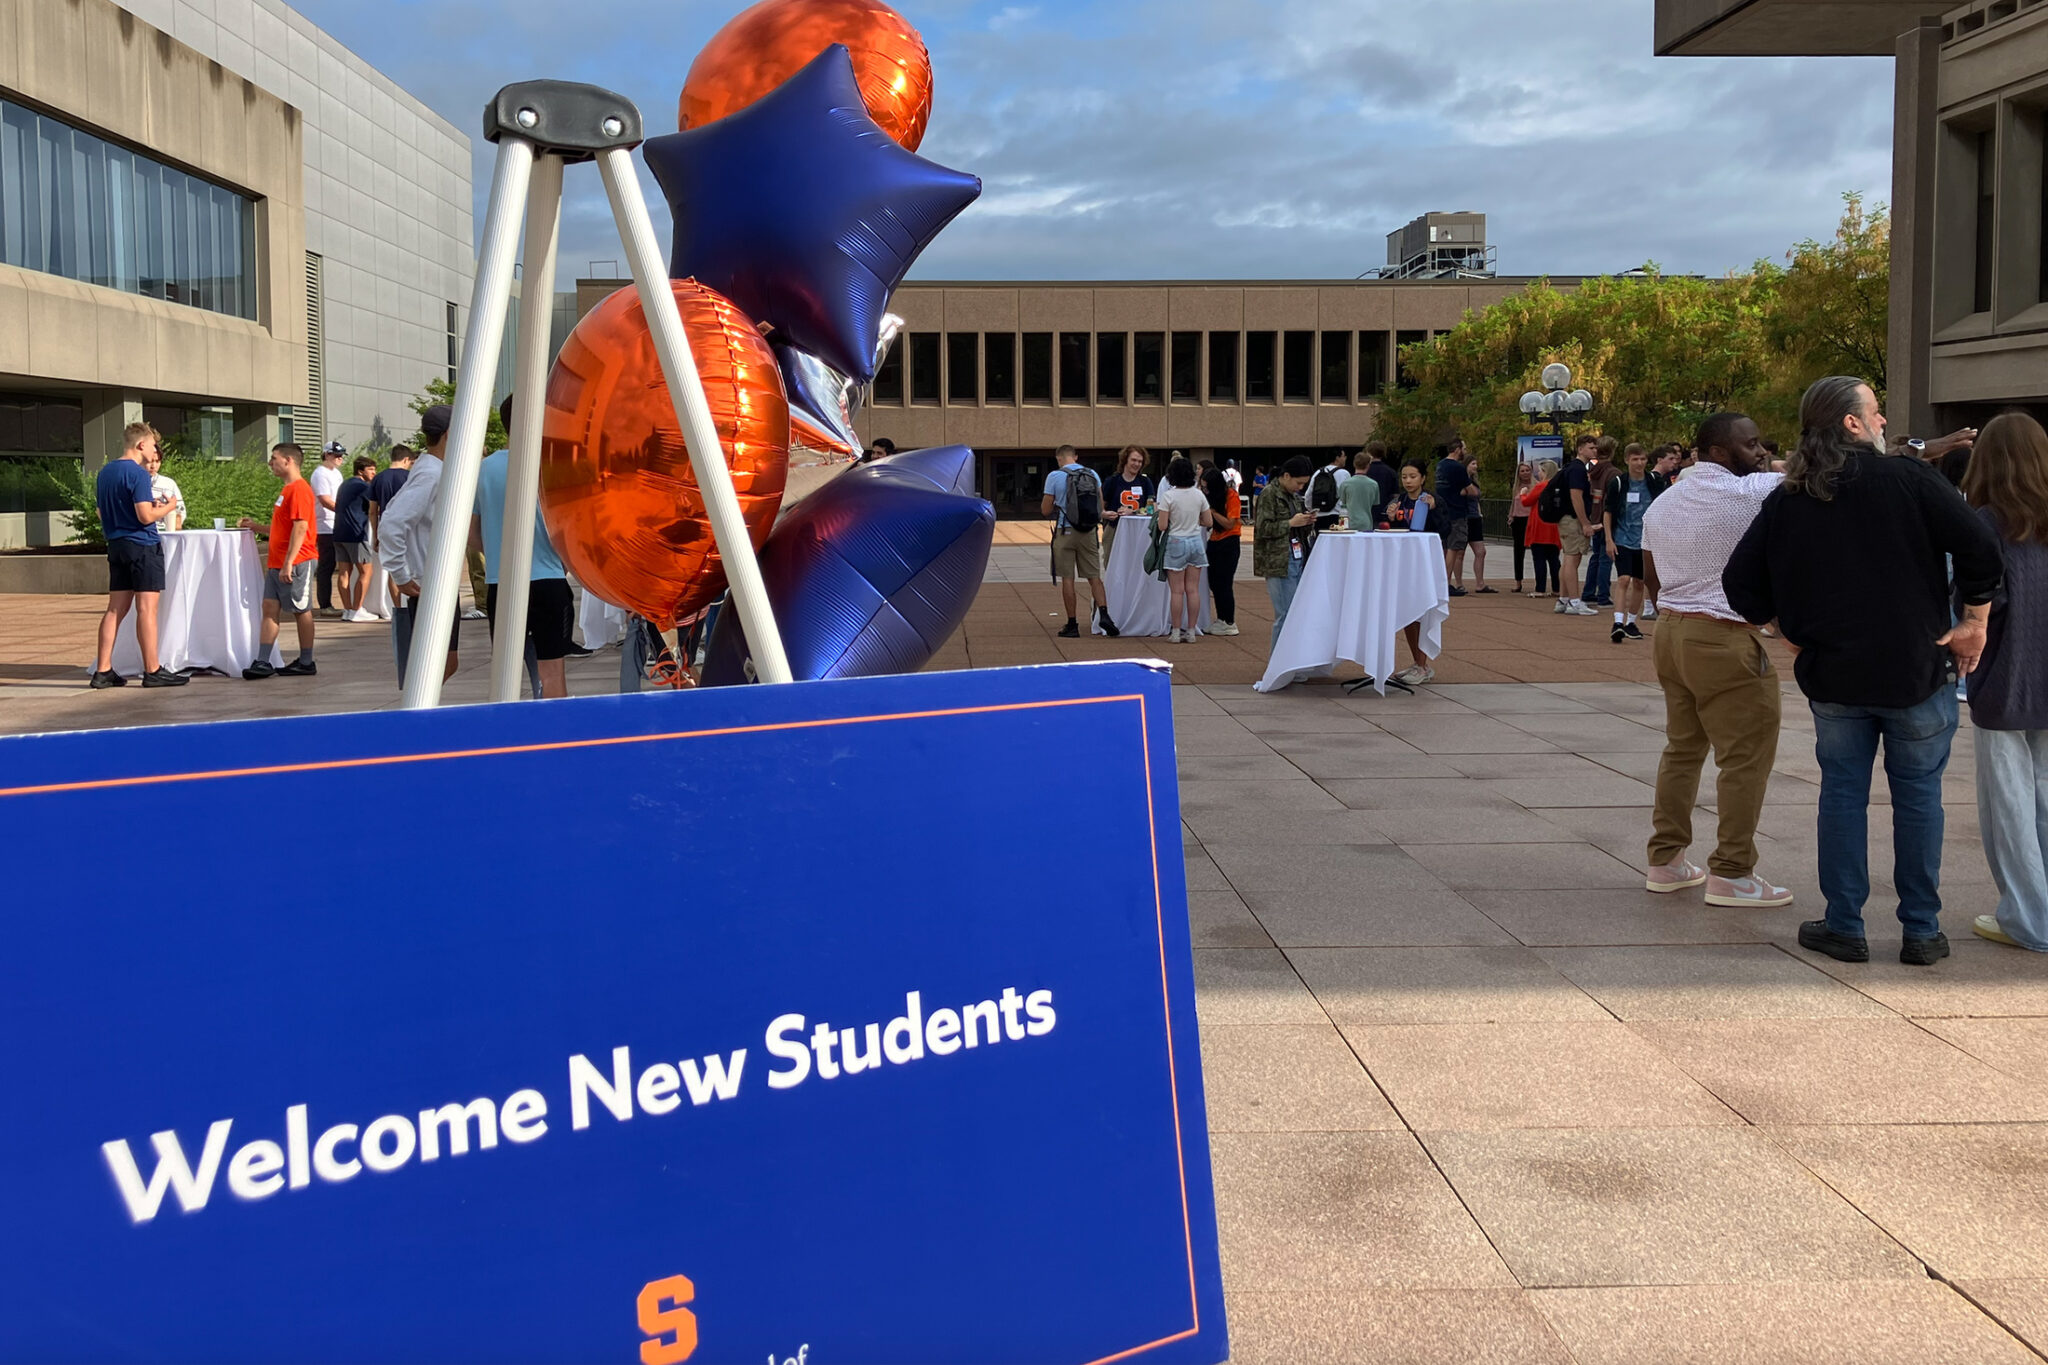 newhouse patio filled with students for welcome back day.